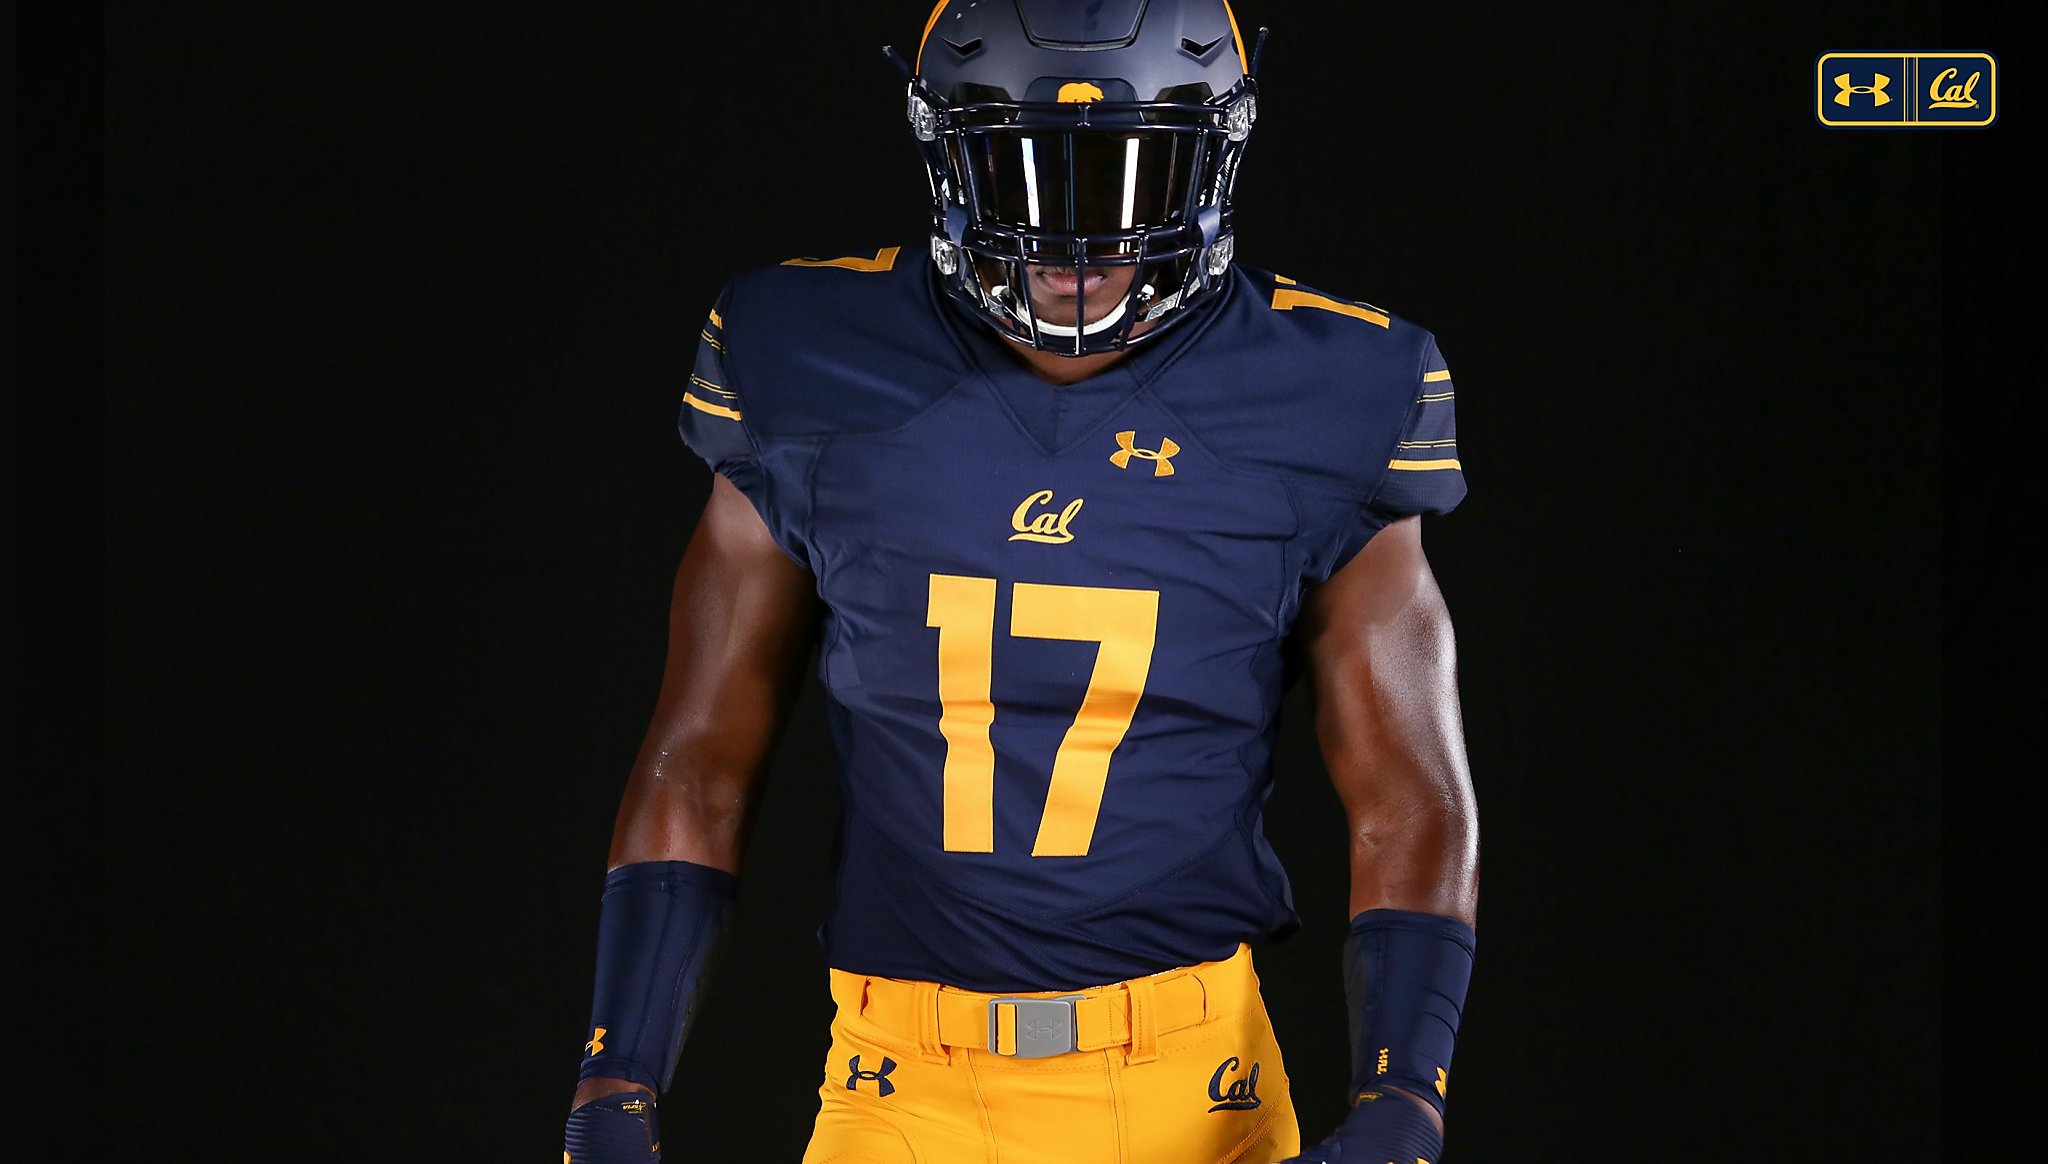 Cal, Under Armour release new home football uniforms